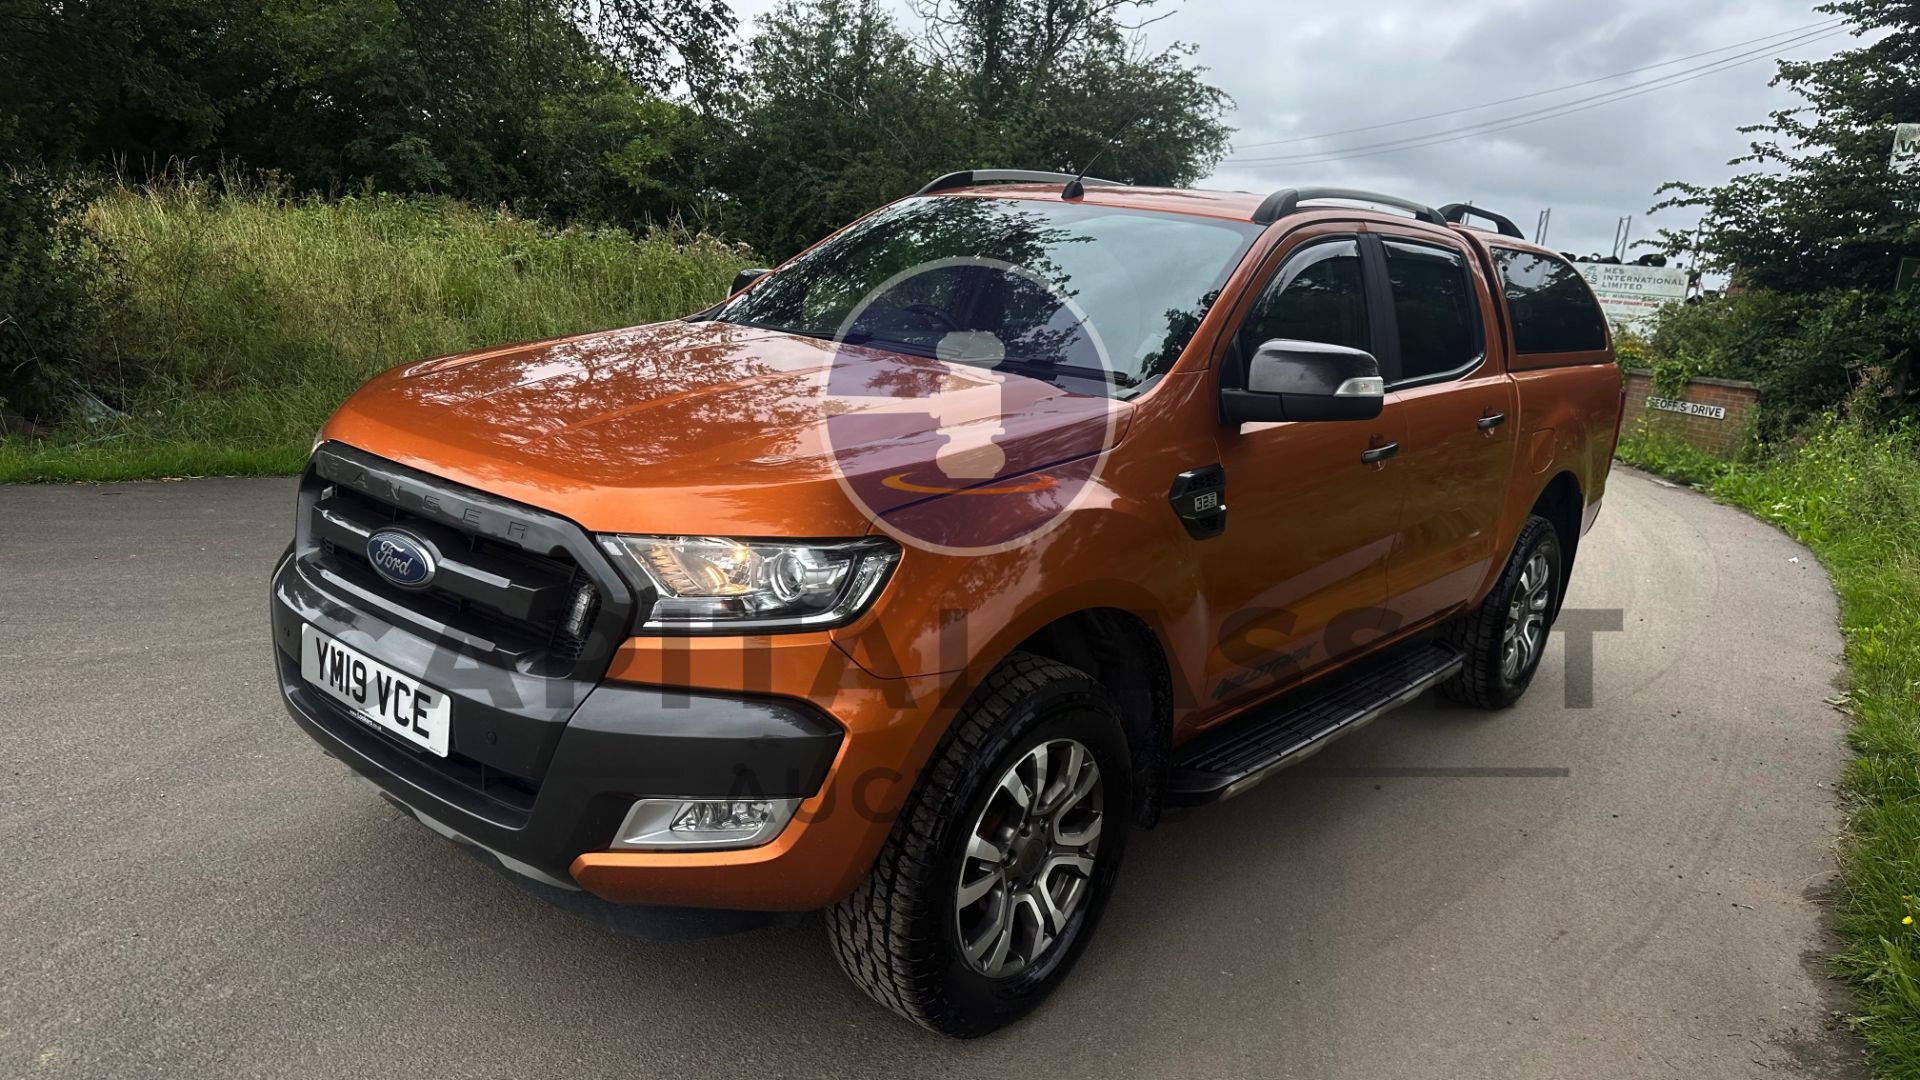 (ON SALE) FORD RANGER *WILDTRAK EDITION* DOUBLE CAB PICK-UP (2019 - EURO 6) 3.2 TDCI - AUTOMATIC - Image 5 of 53